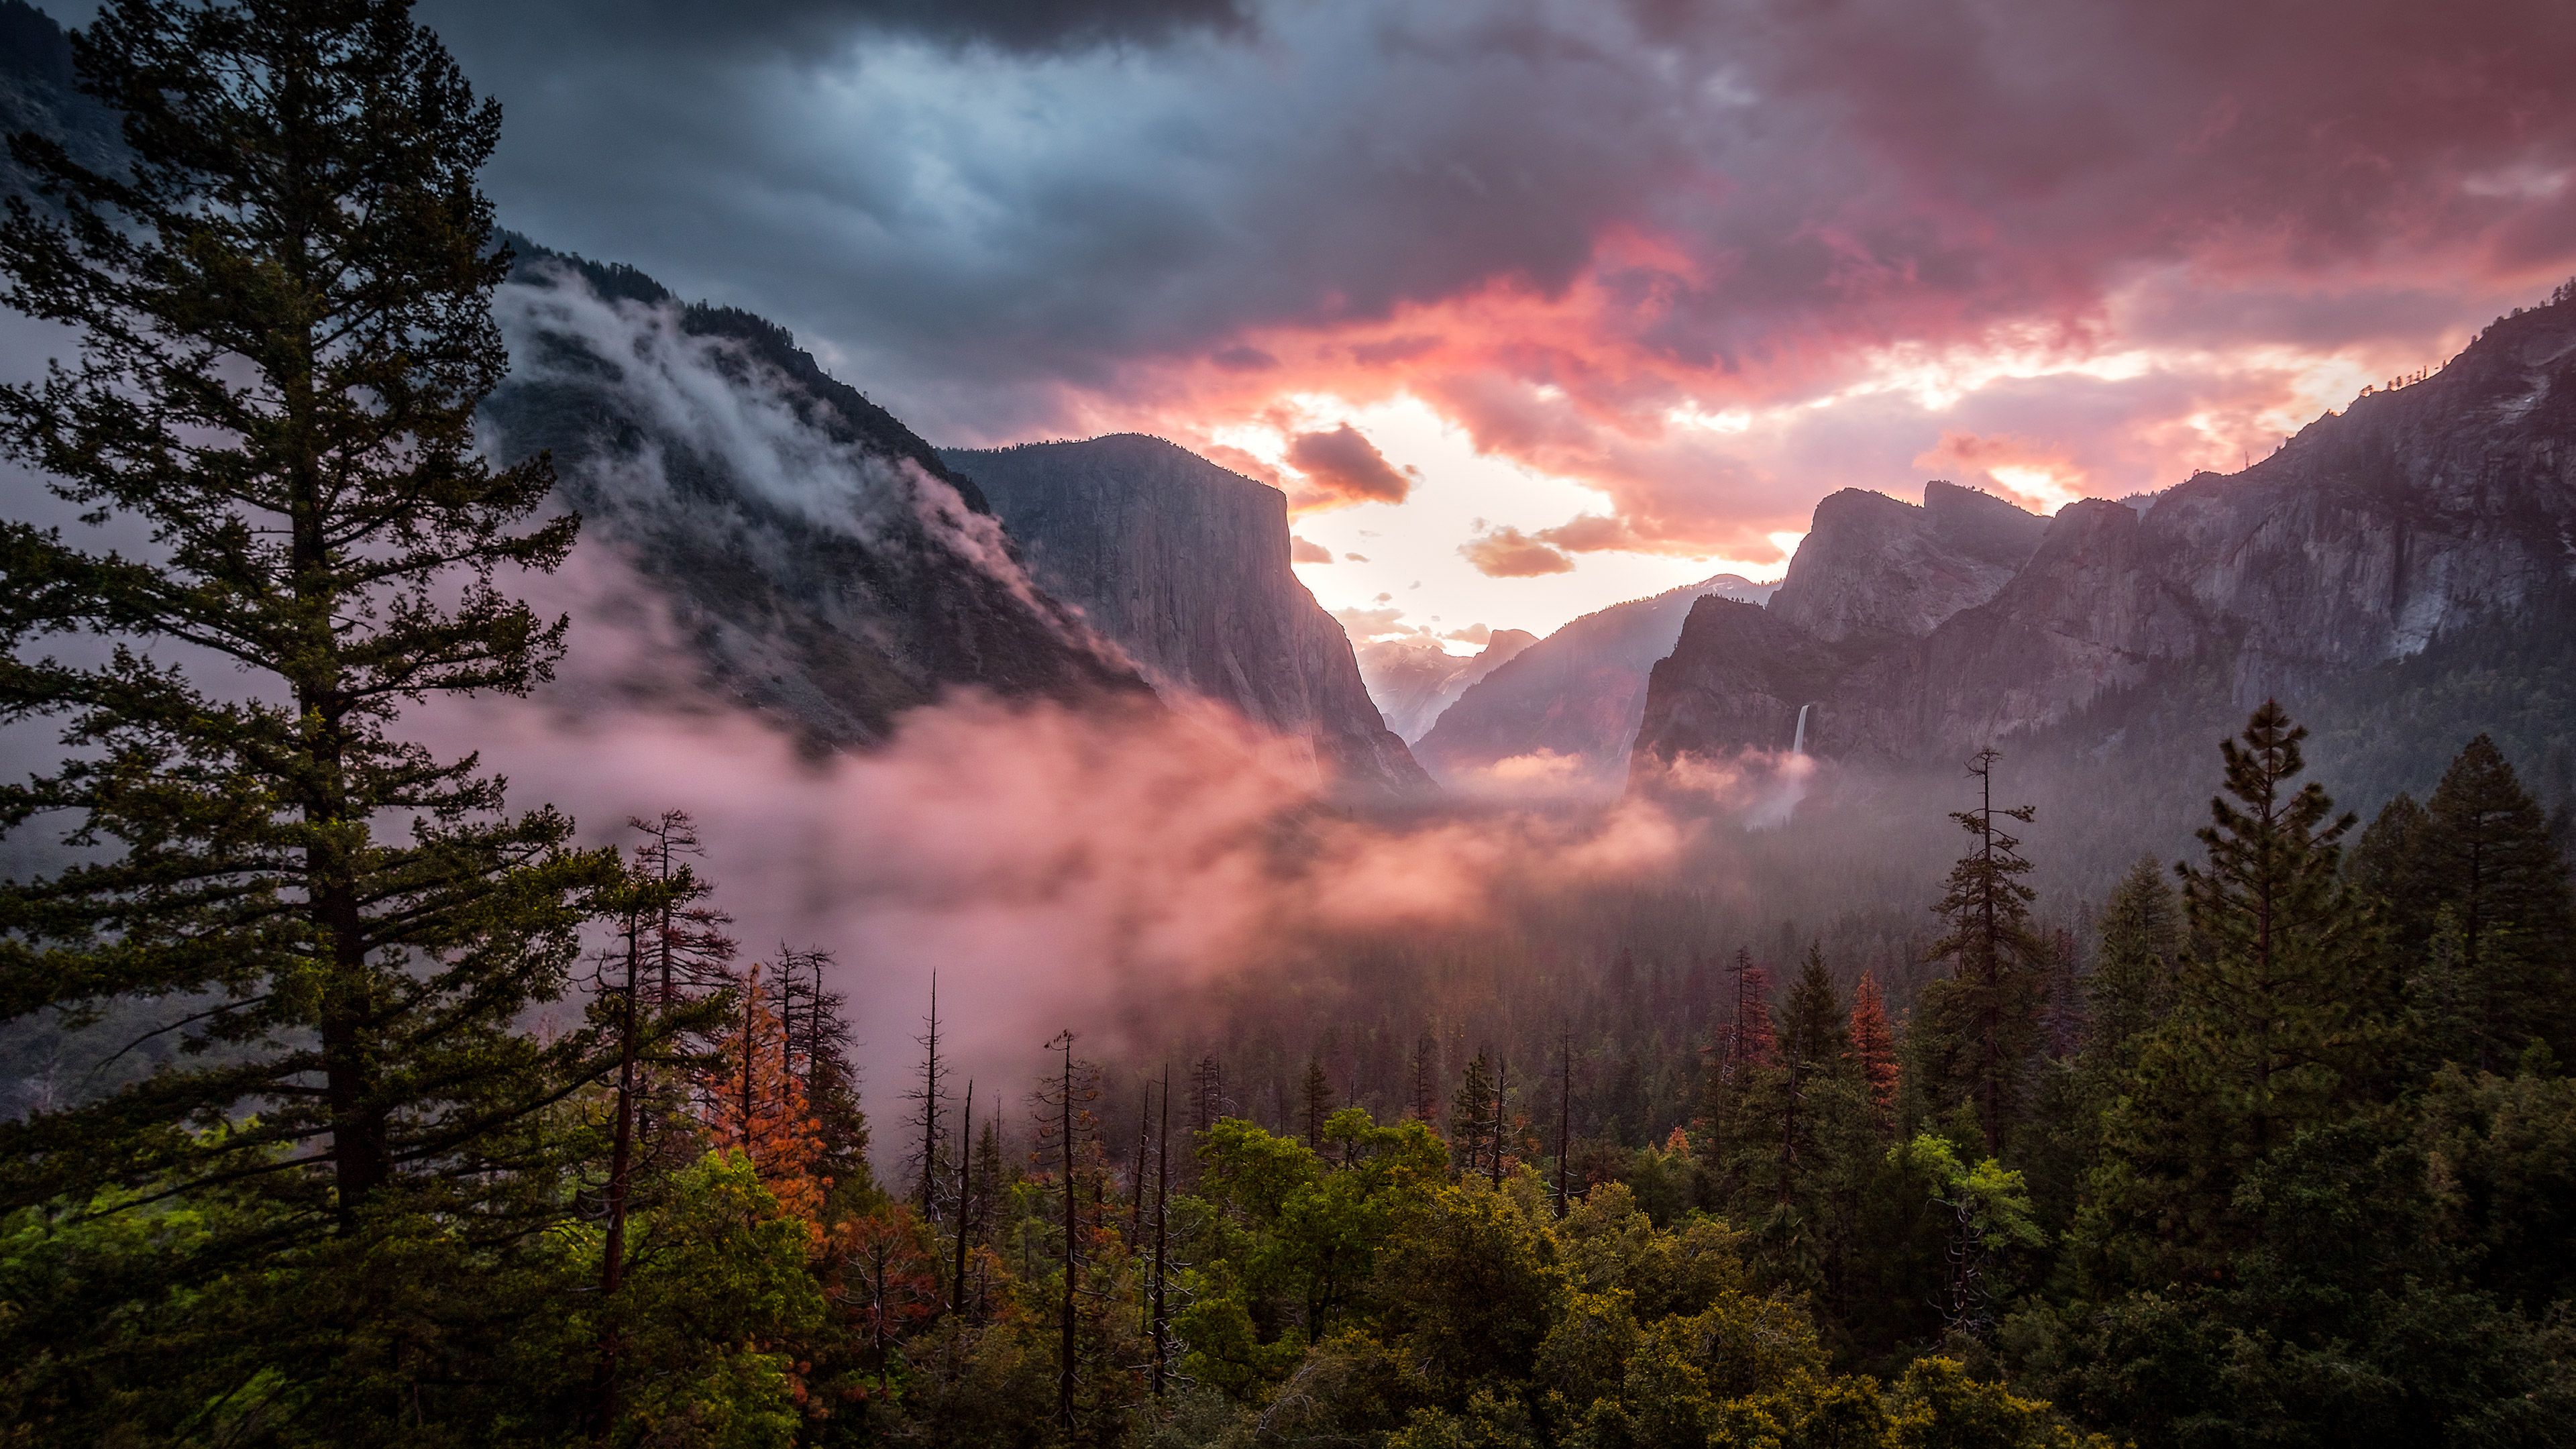 Download wallpaper 4k, America, Yosemite Valley, morning, Yosemite National Park, fog, forest, California, USA for desktop with resolution 3840x2160. High Quality HD picture wallpaper